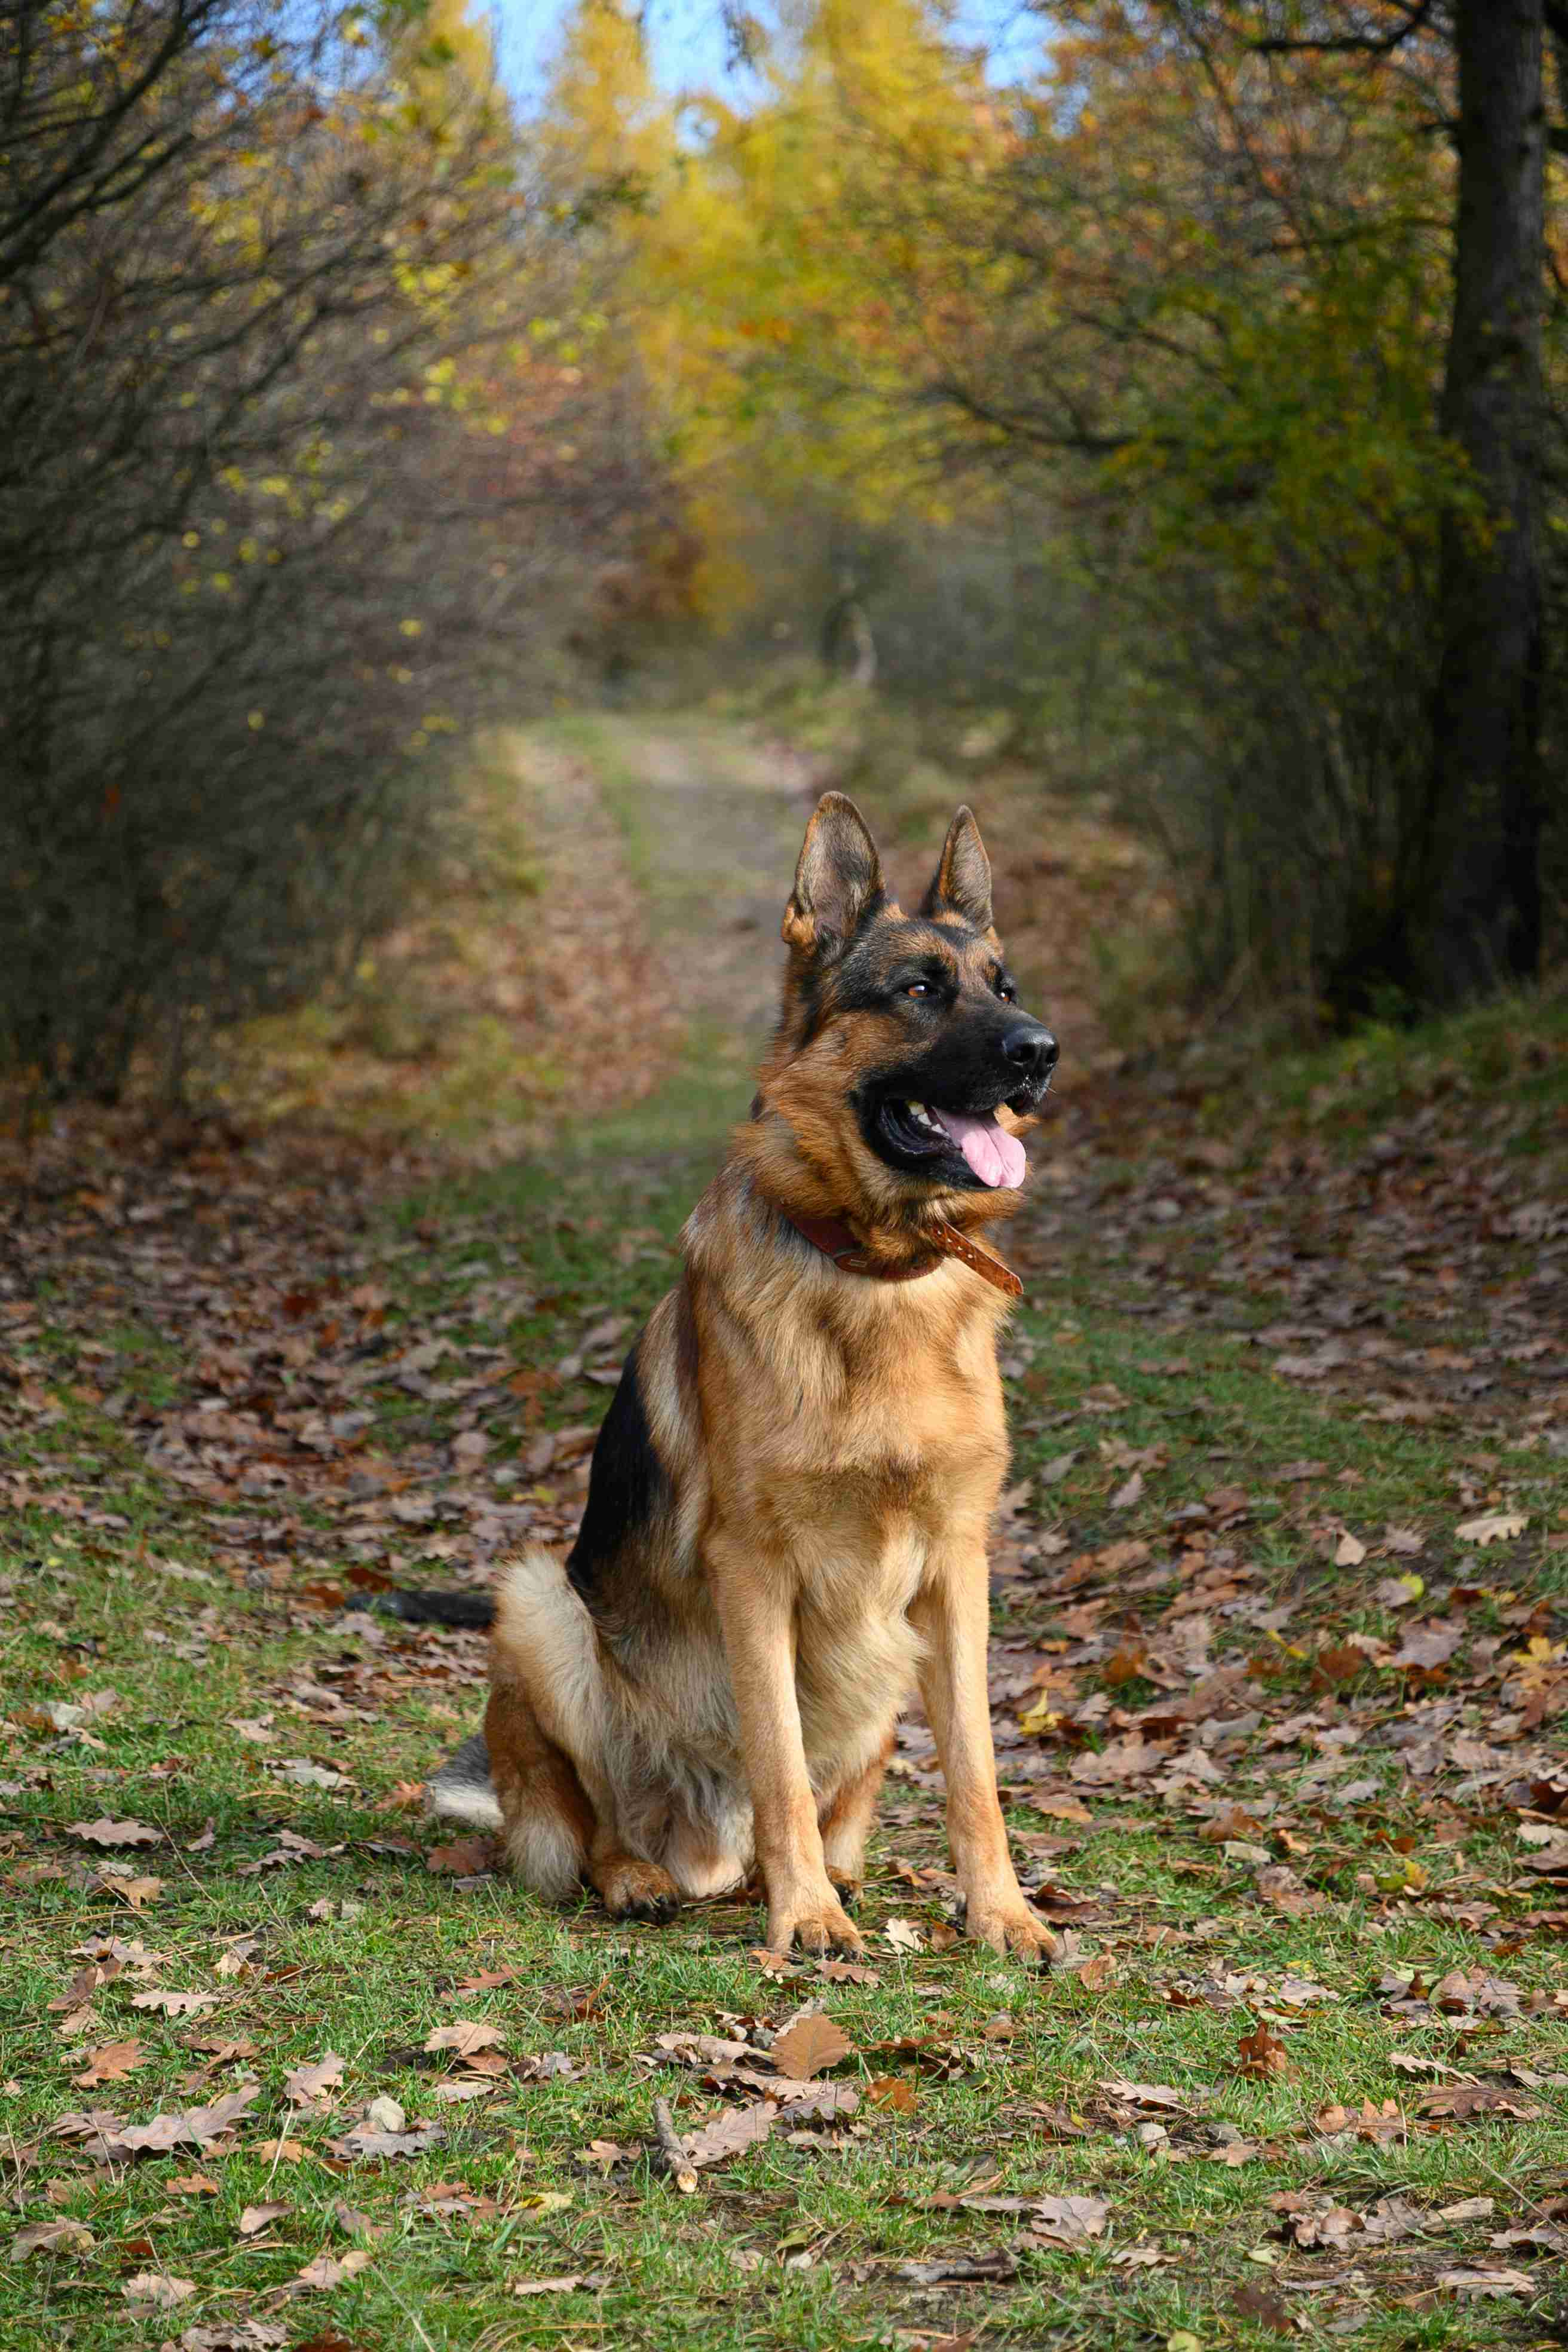 How do you prevent separation anxiety in a German shepherd puppy?